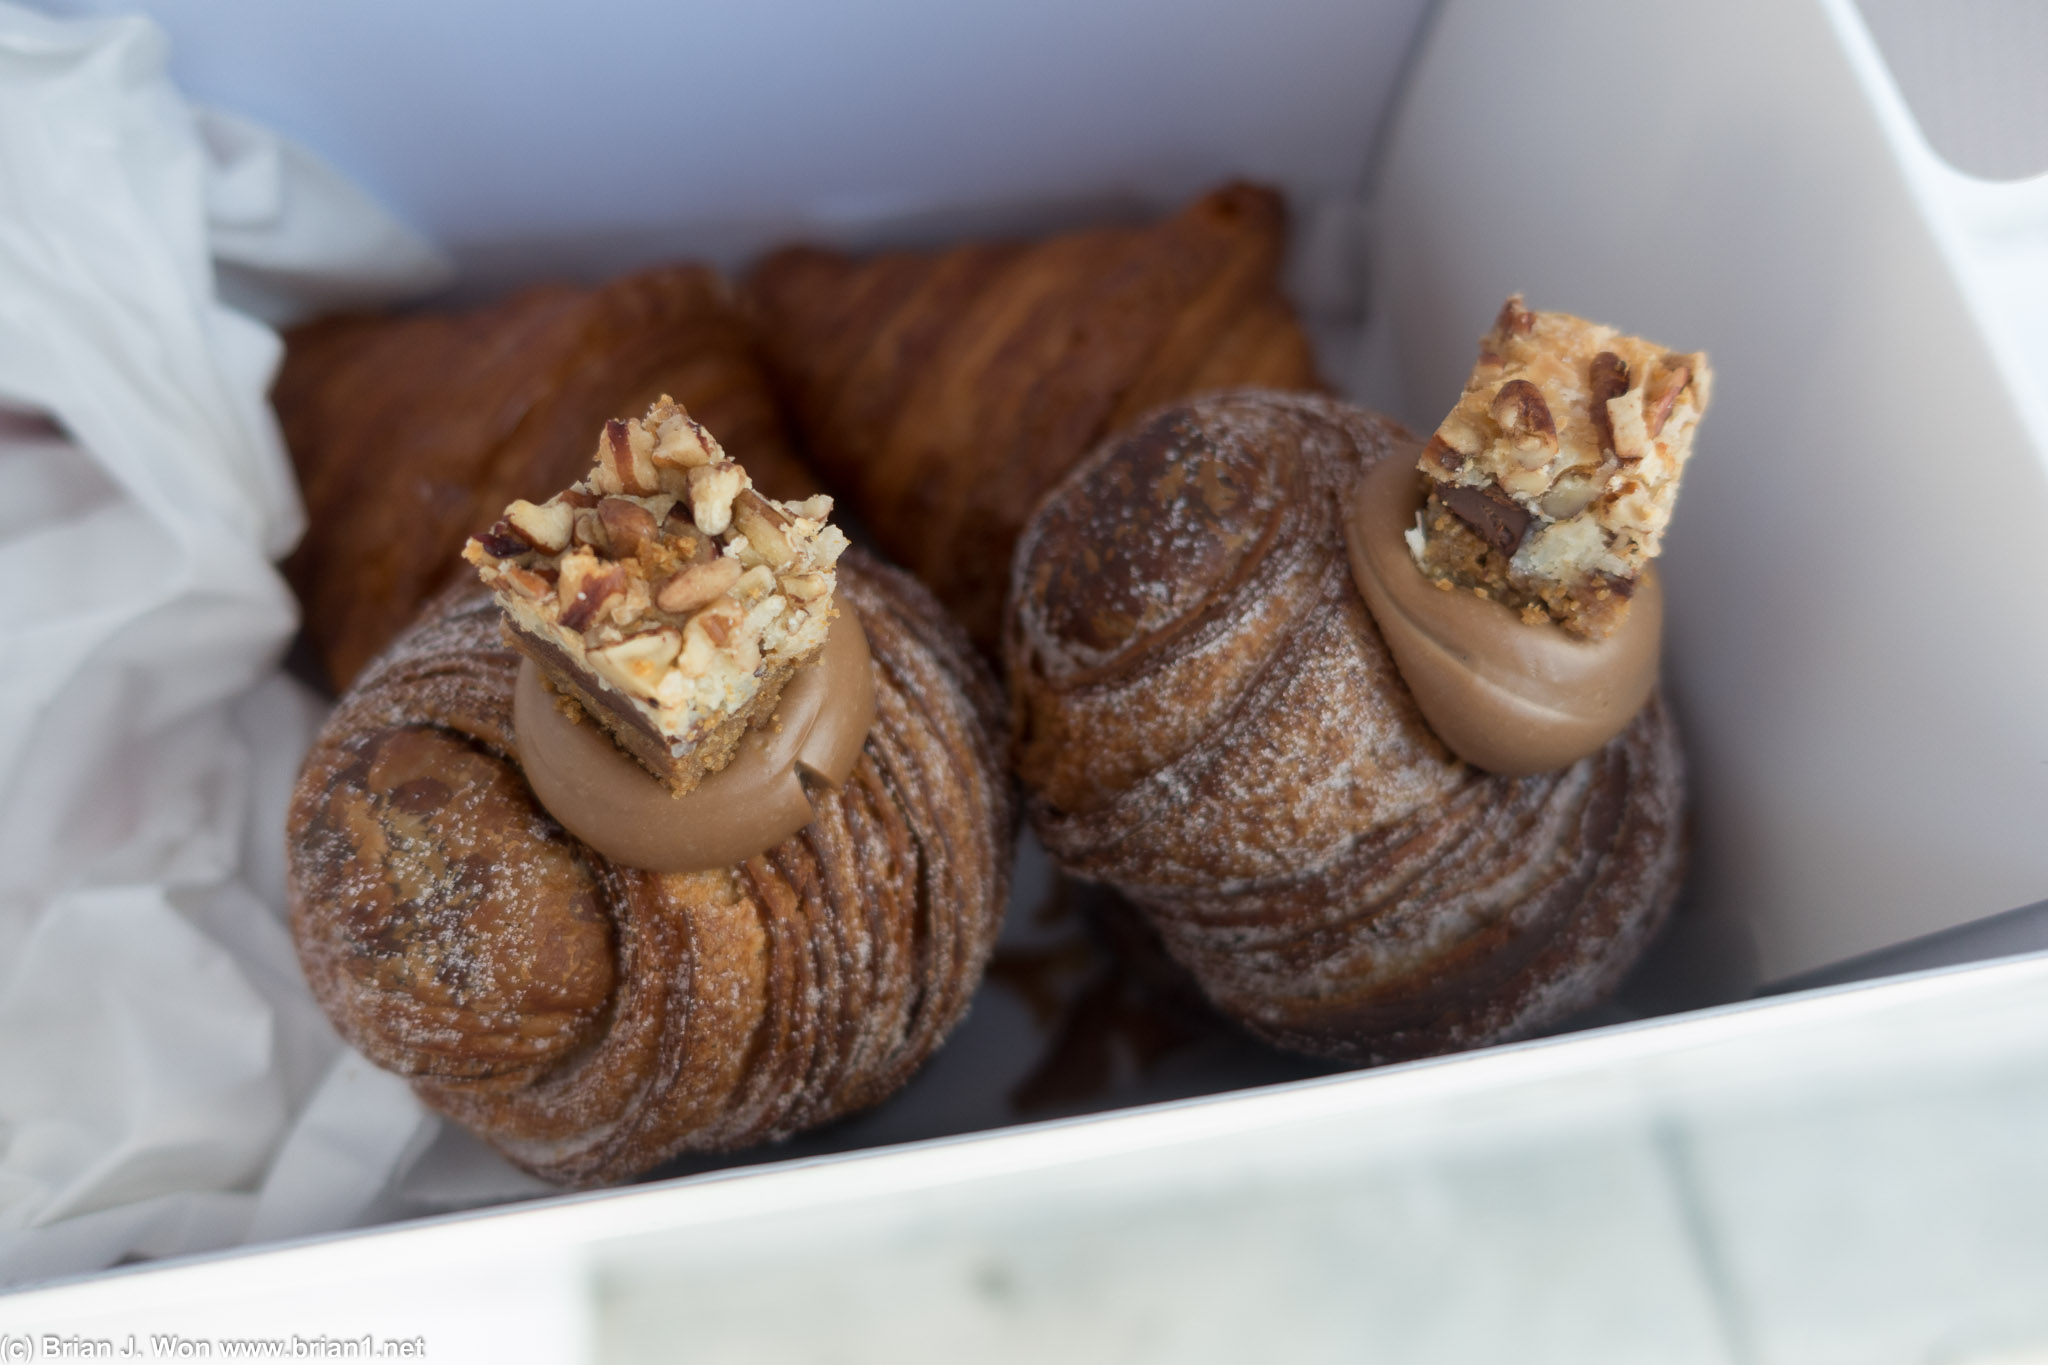 Cruffin flavor of the month: chocolate caramel.